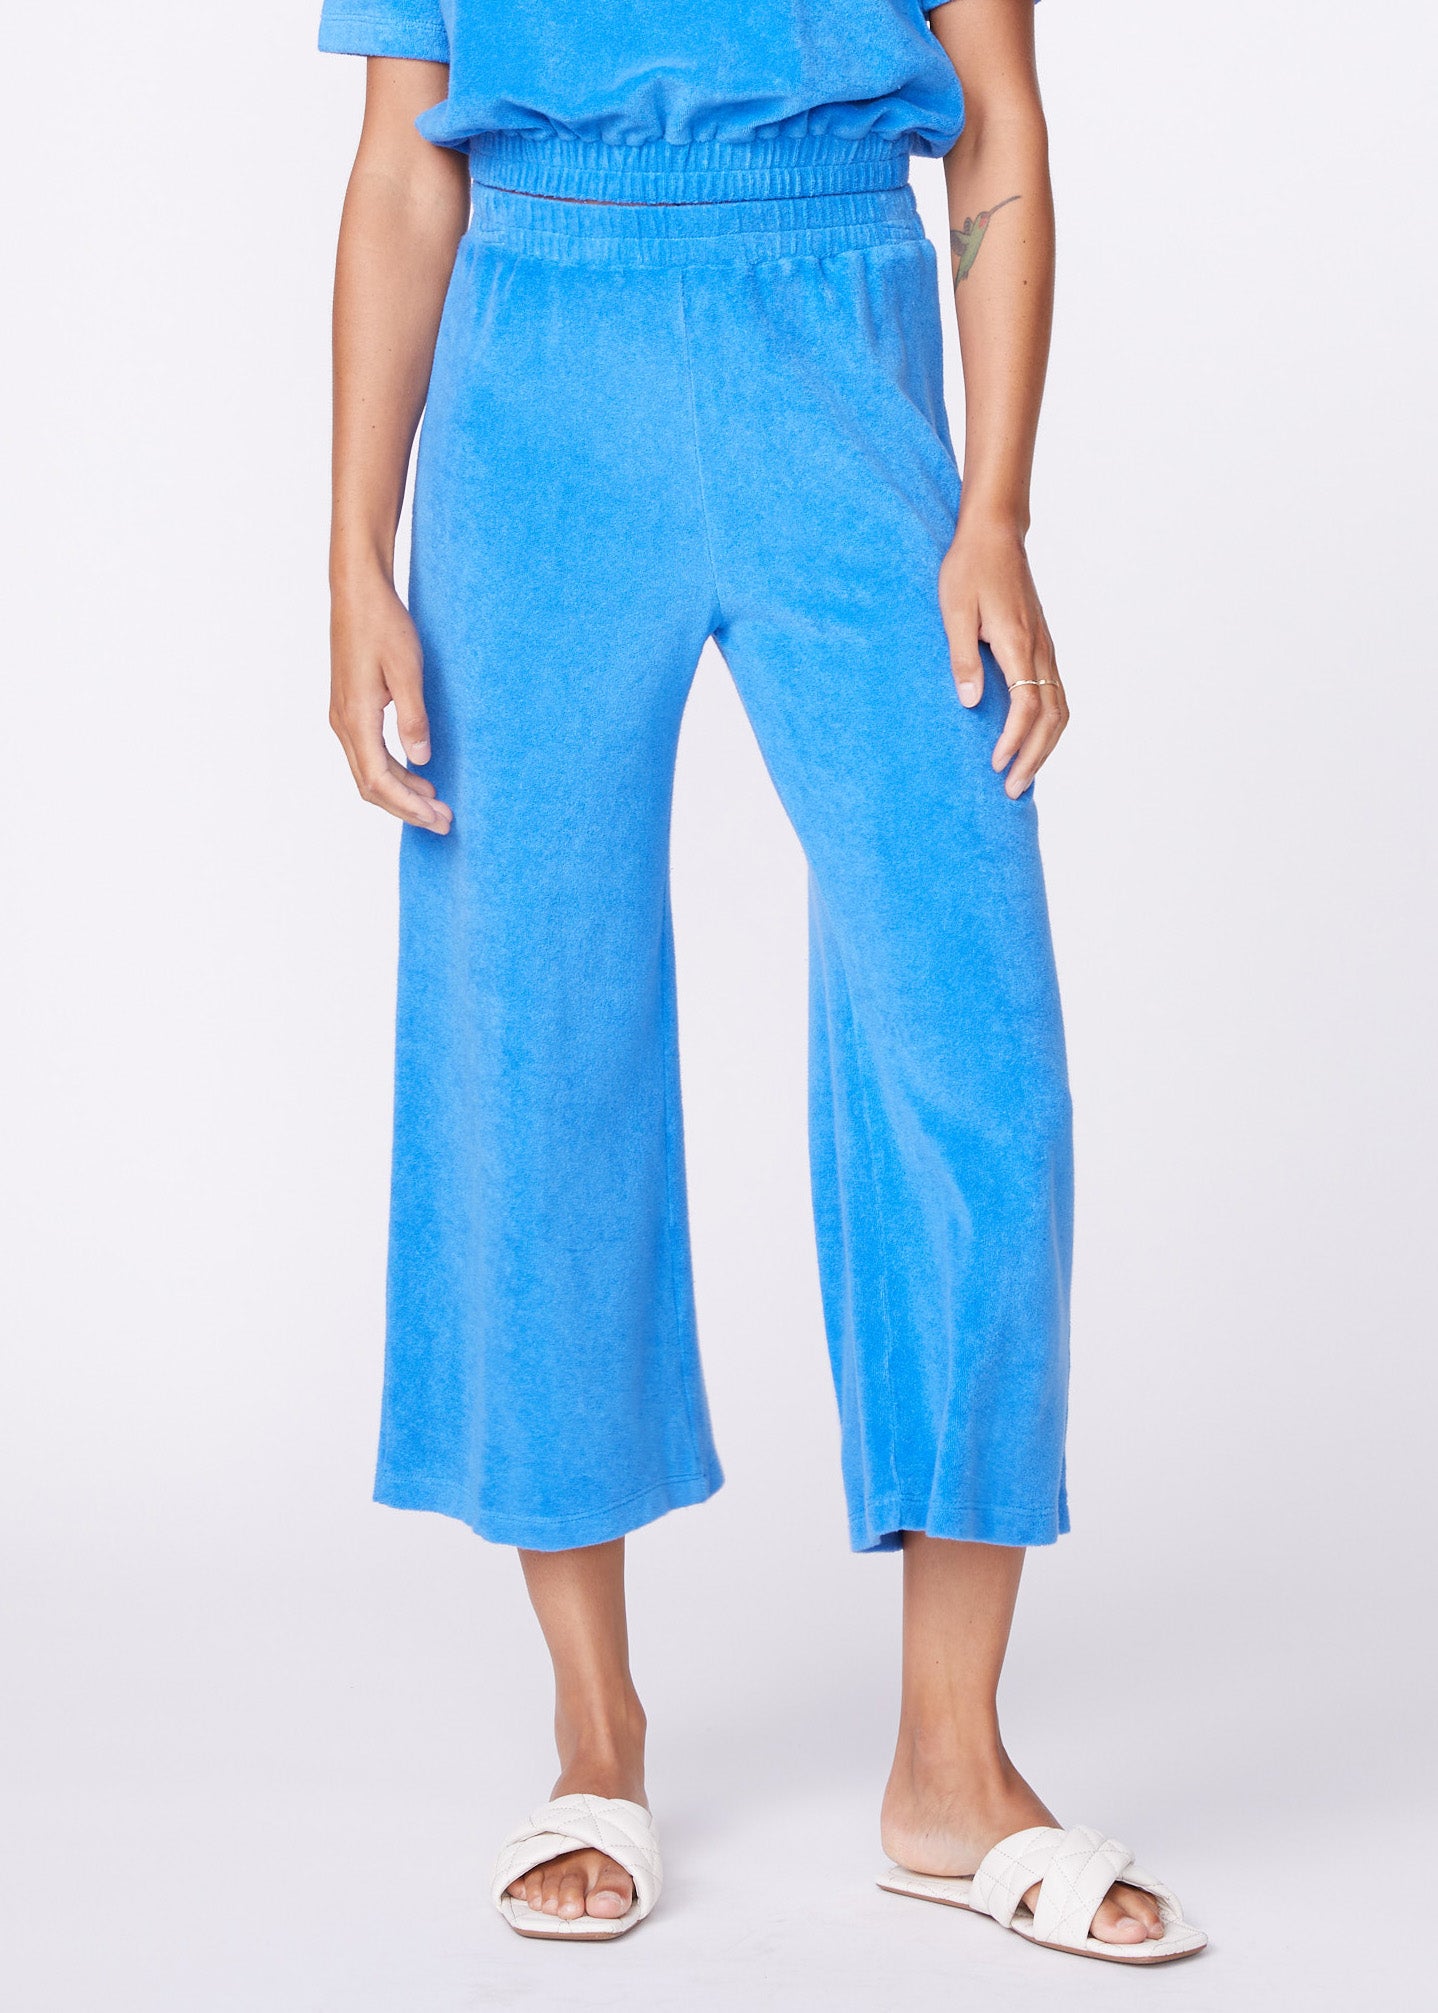 Terry Cloth Flare Pants